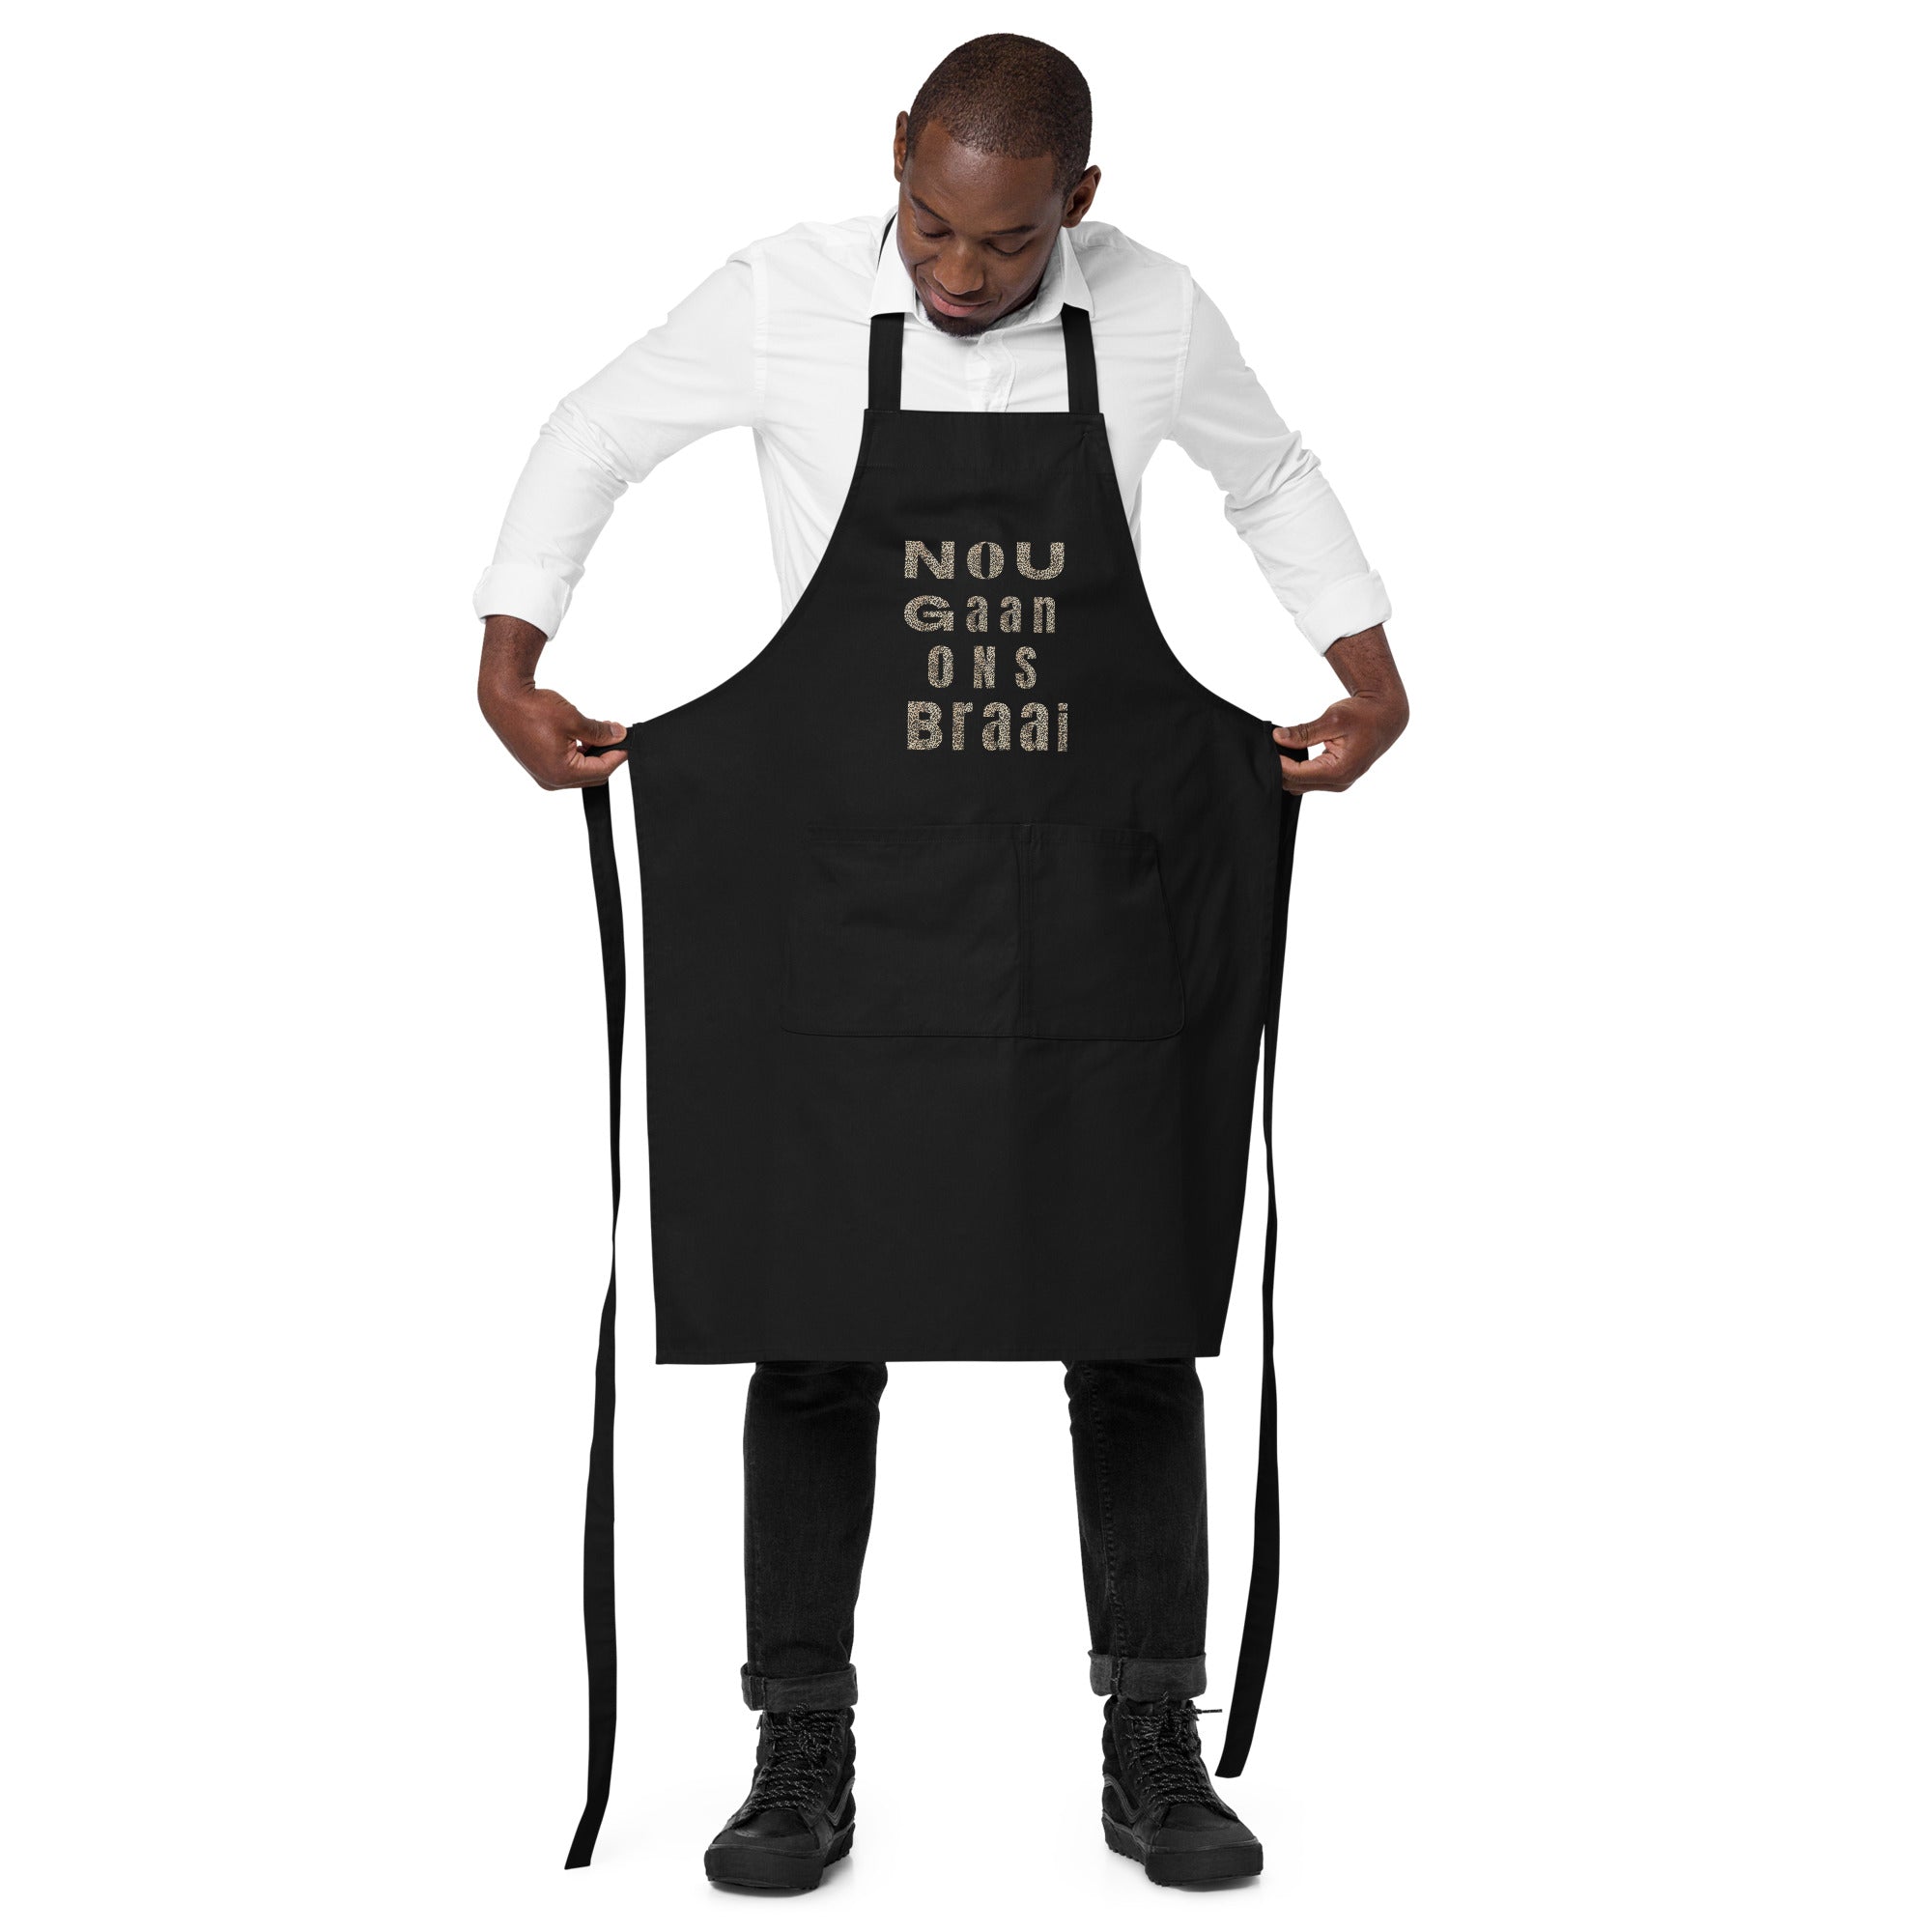 Nou Gaan Ons Braai South Africa Afrikaans Barbeque Grill Organic cotton apron